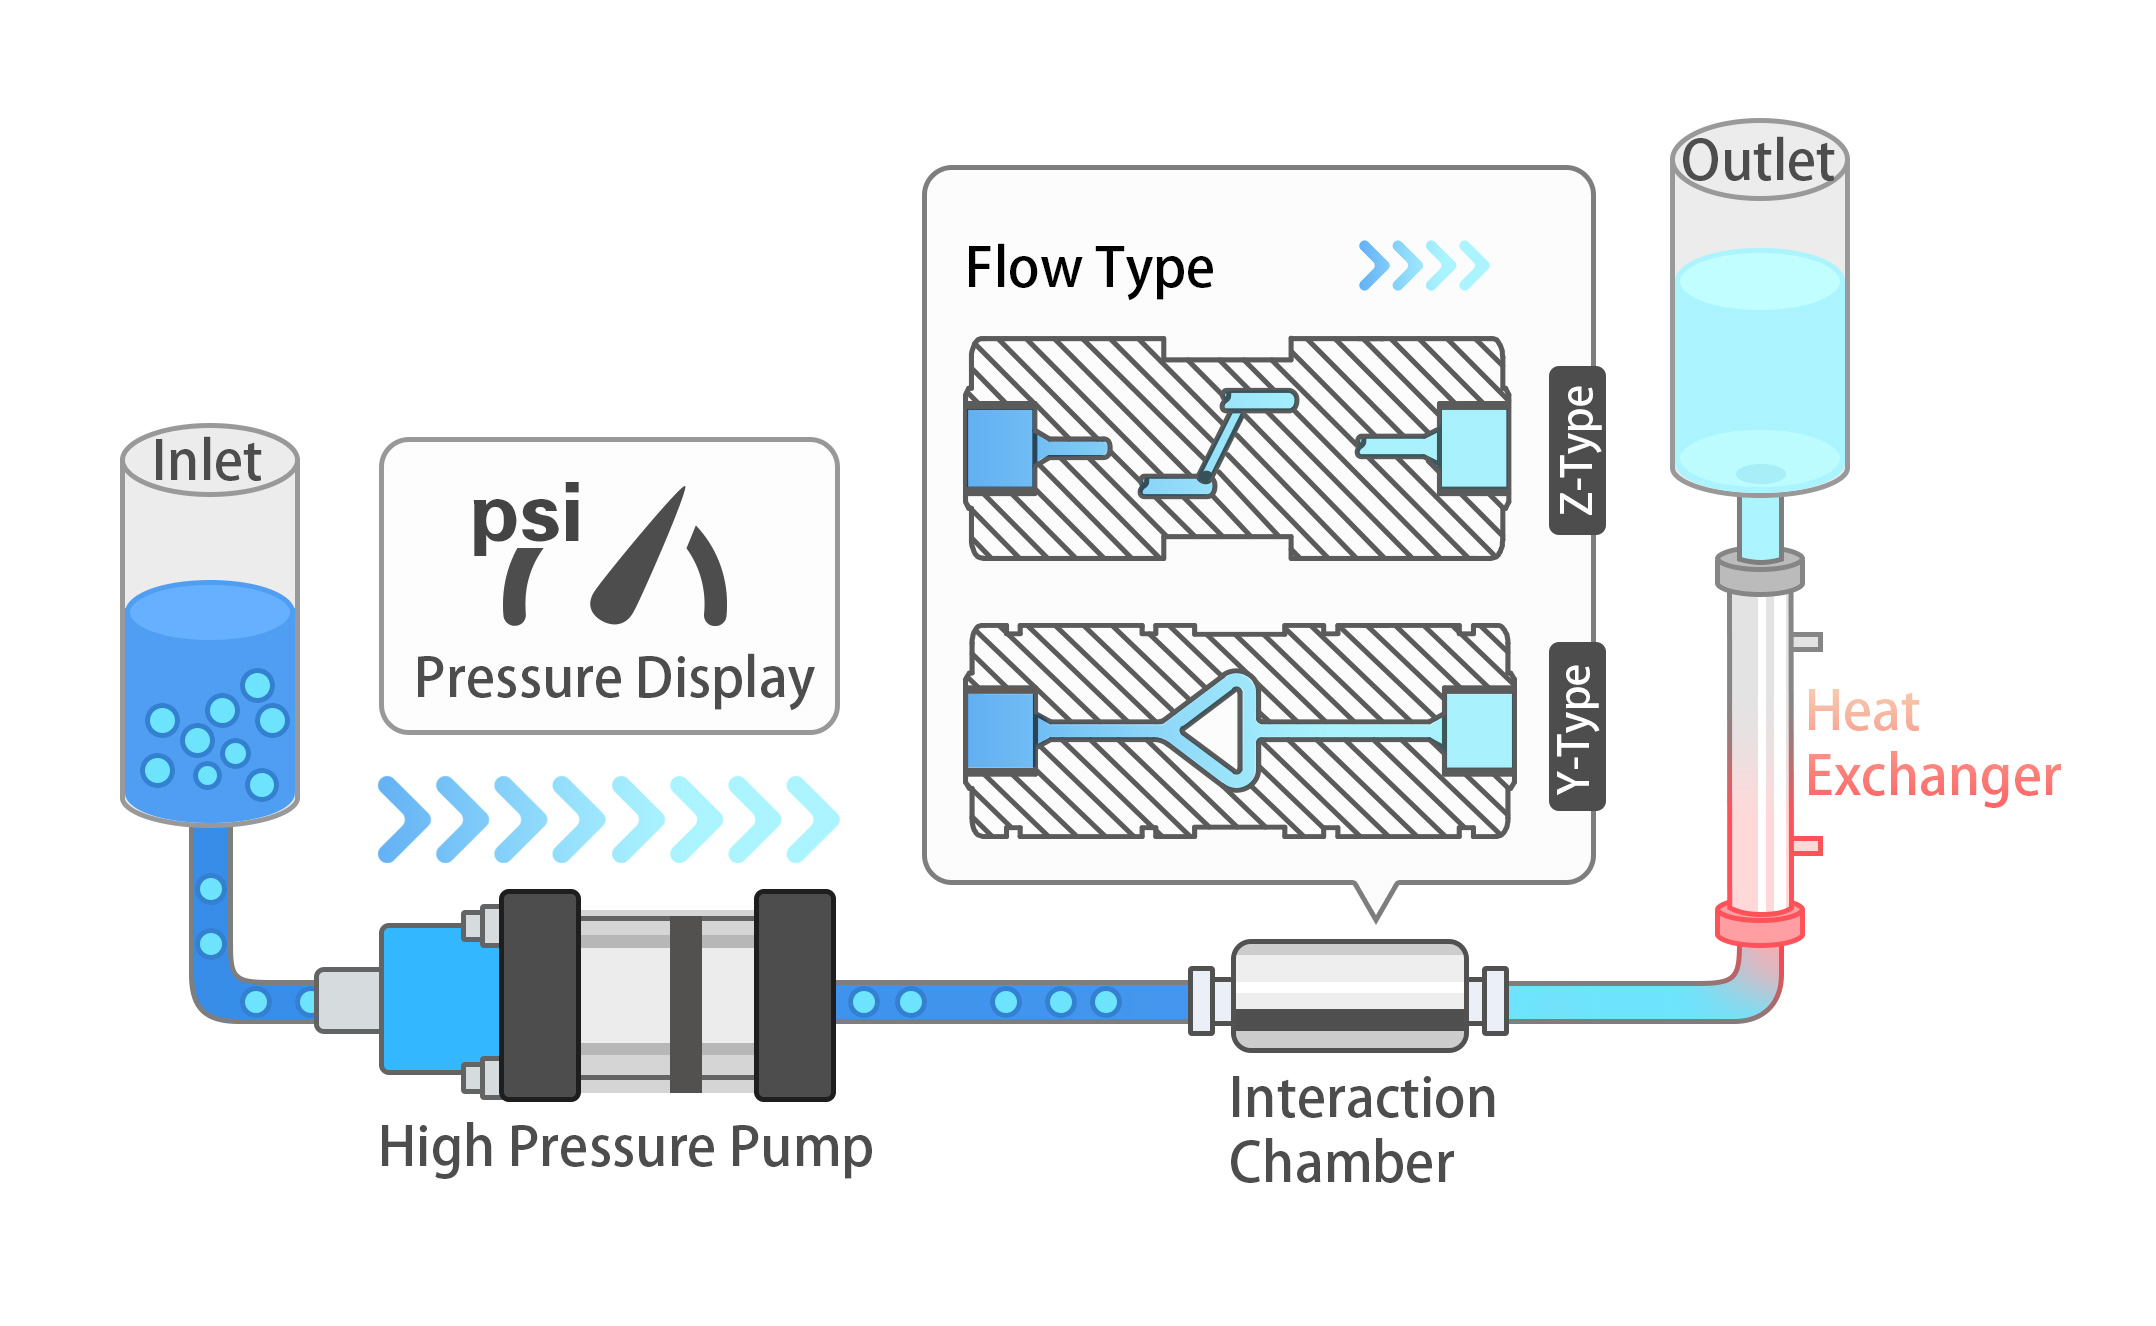 Diagram of the core processing unit, including the inlet valve, pressure display, high-pressure pump, interaction chamber, heat exchanger and outlet reservoir. Also a flow type diagram for Y and Z shaped chambers